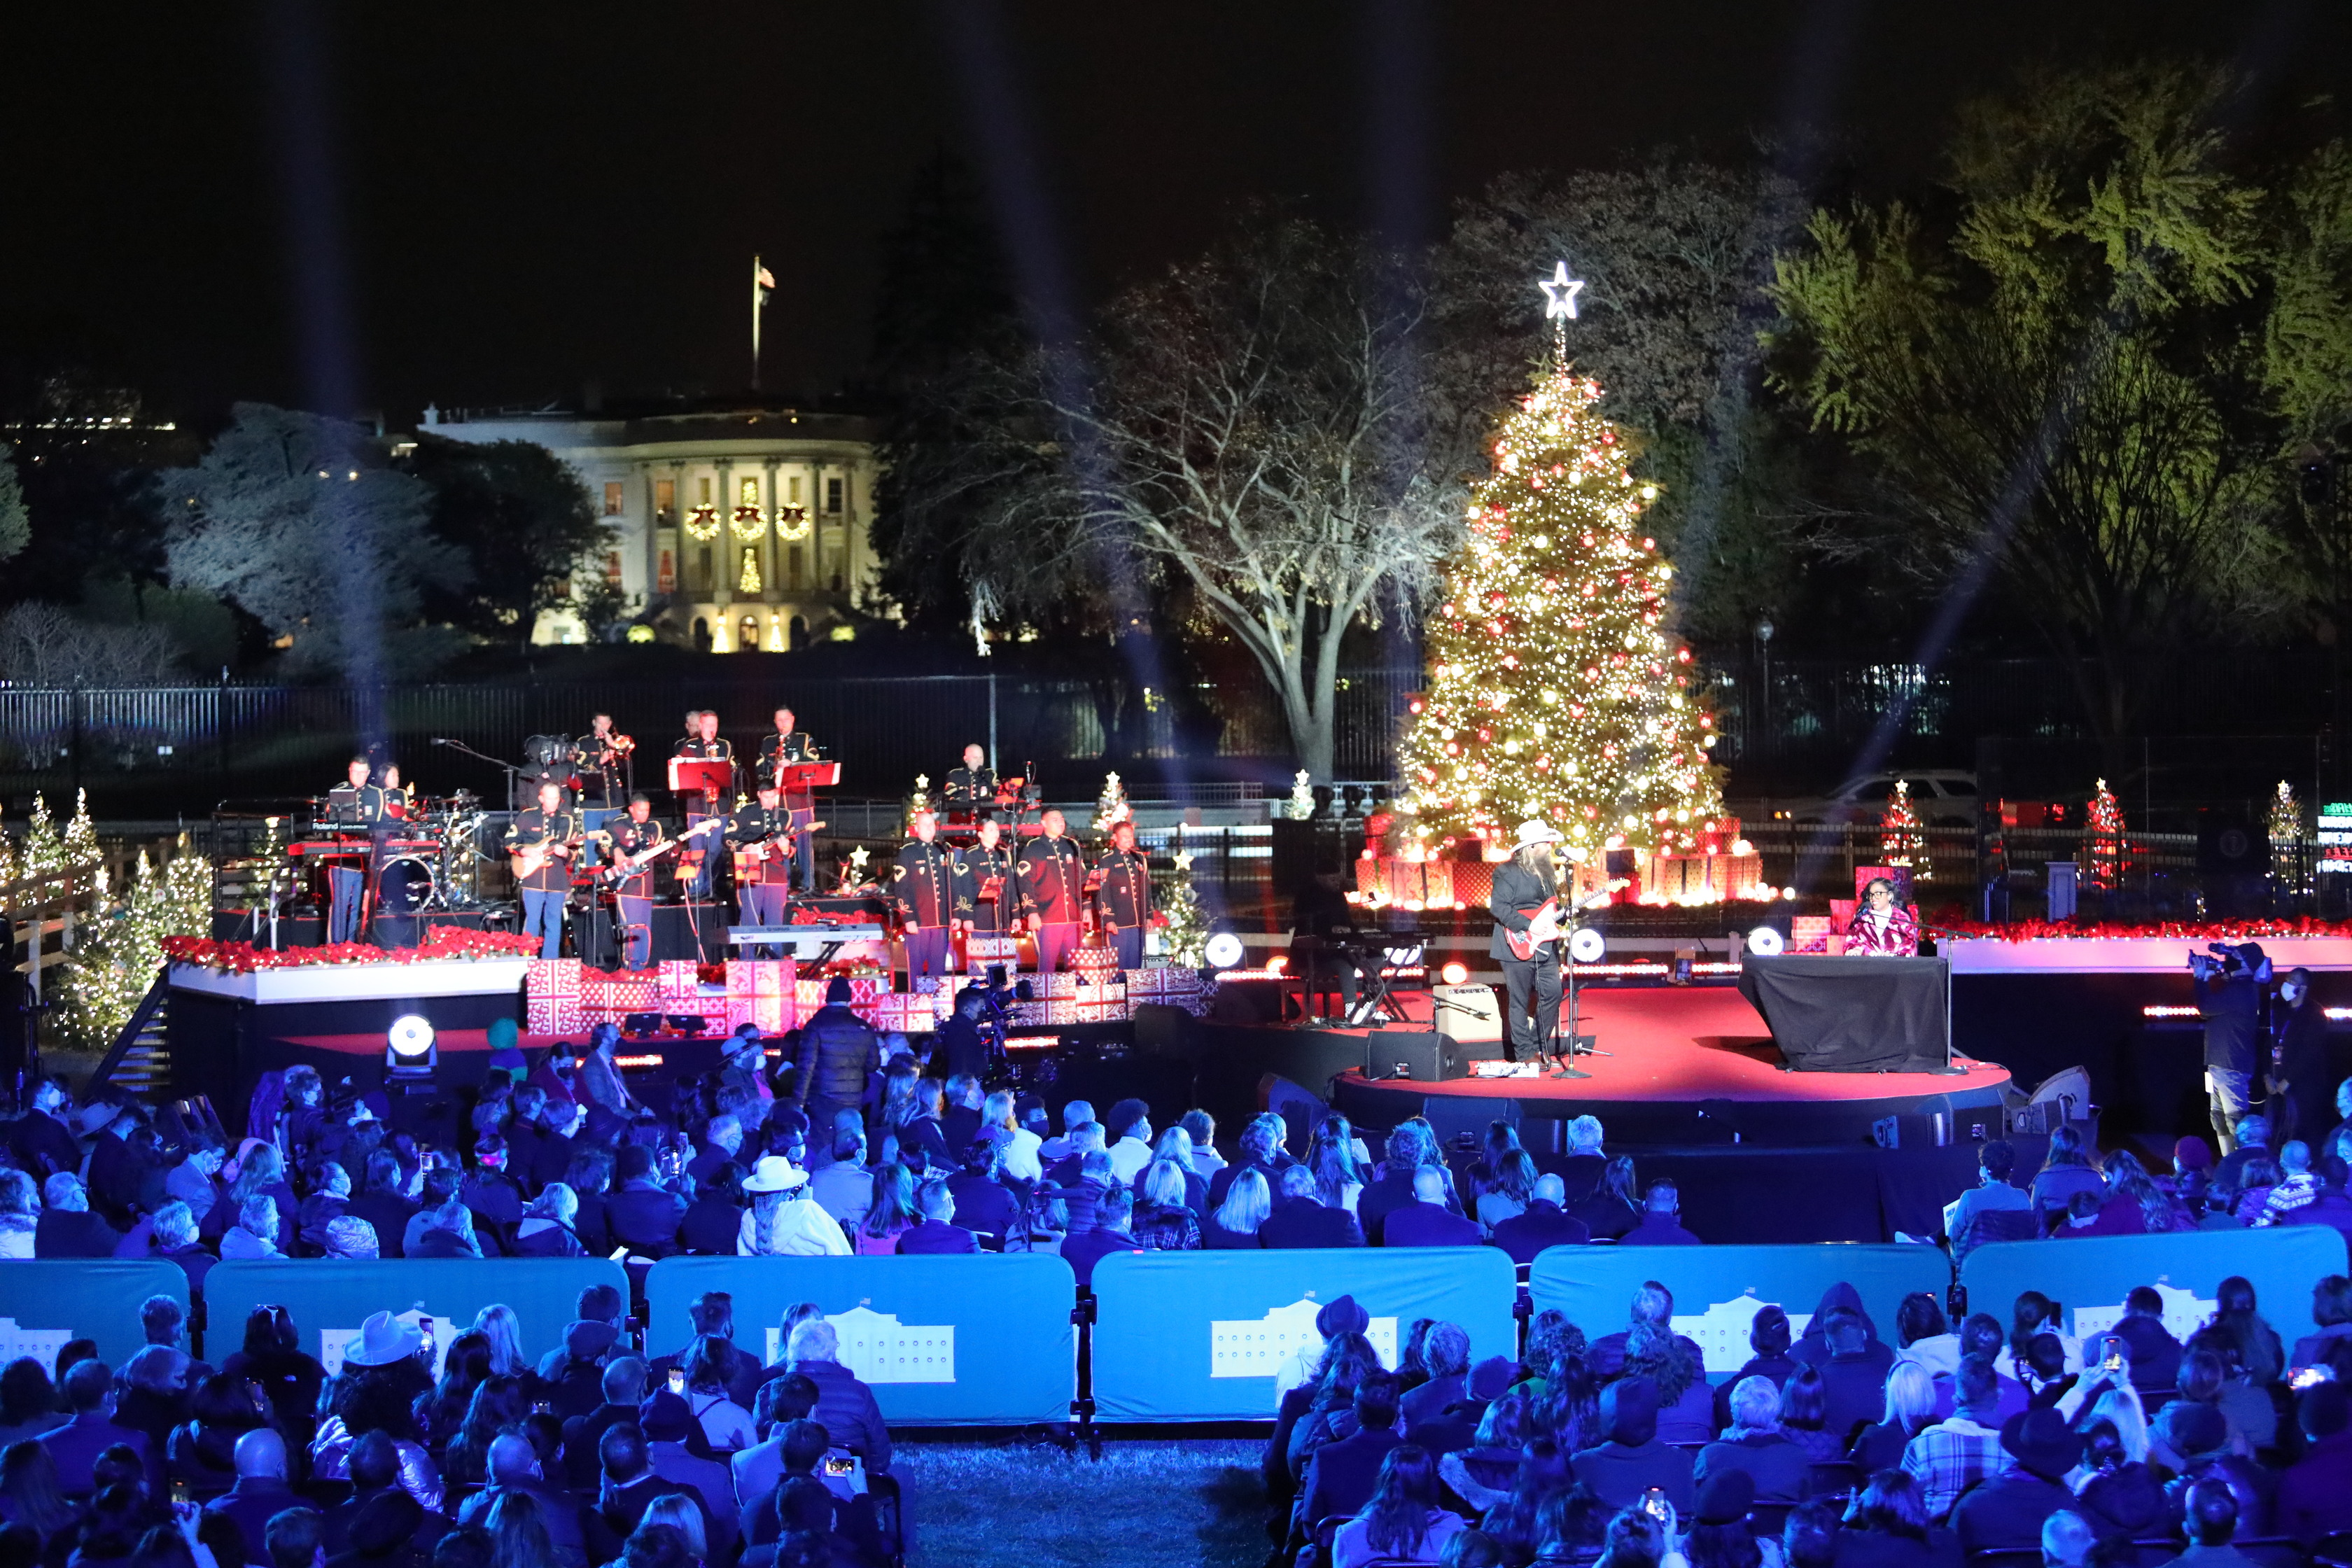 A wide view of Chris Stapleton playing guitar, H.E.R. playing keyboard, the backup band, the lit Christmas Tree, the White House, and the crowd seated in the audience.